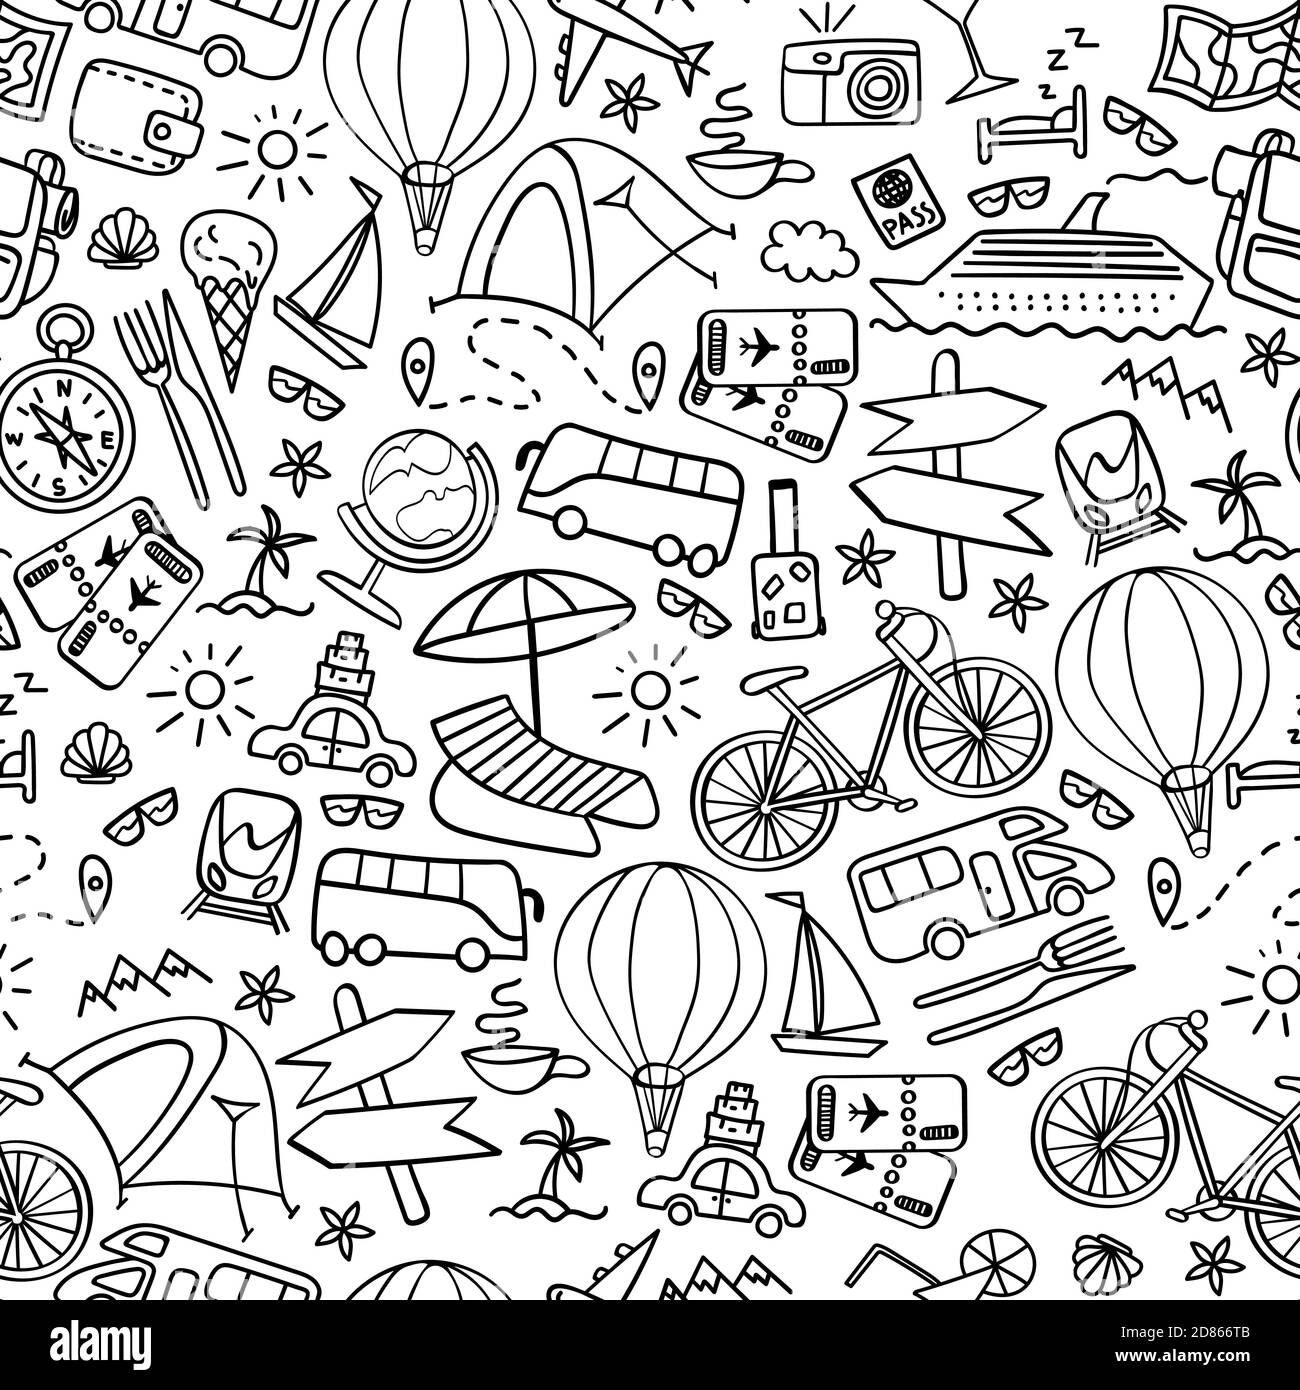 Travel doodles seamless pattern. Vacation print on white background ...